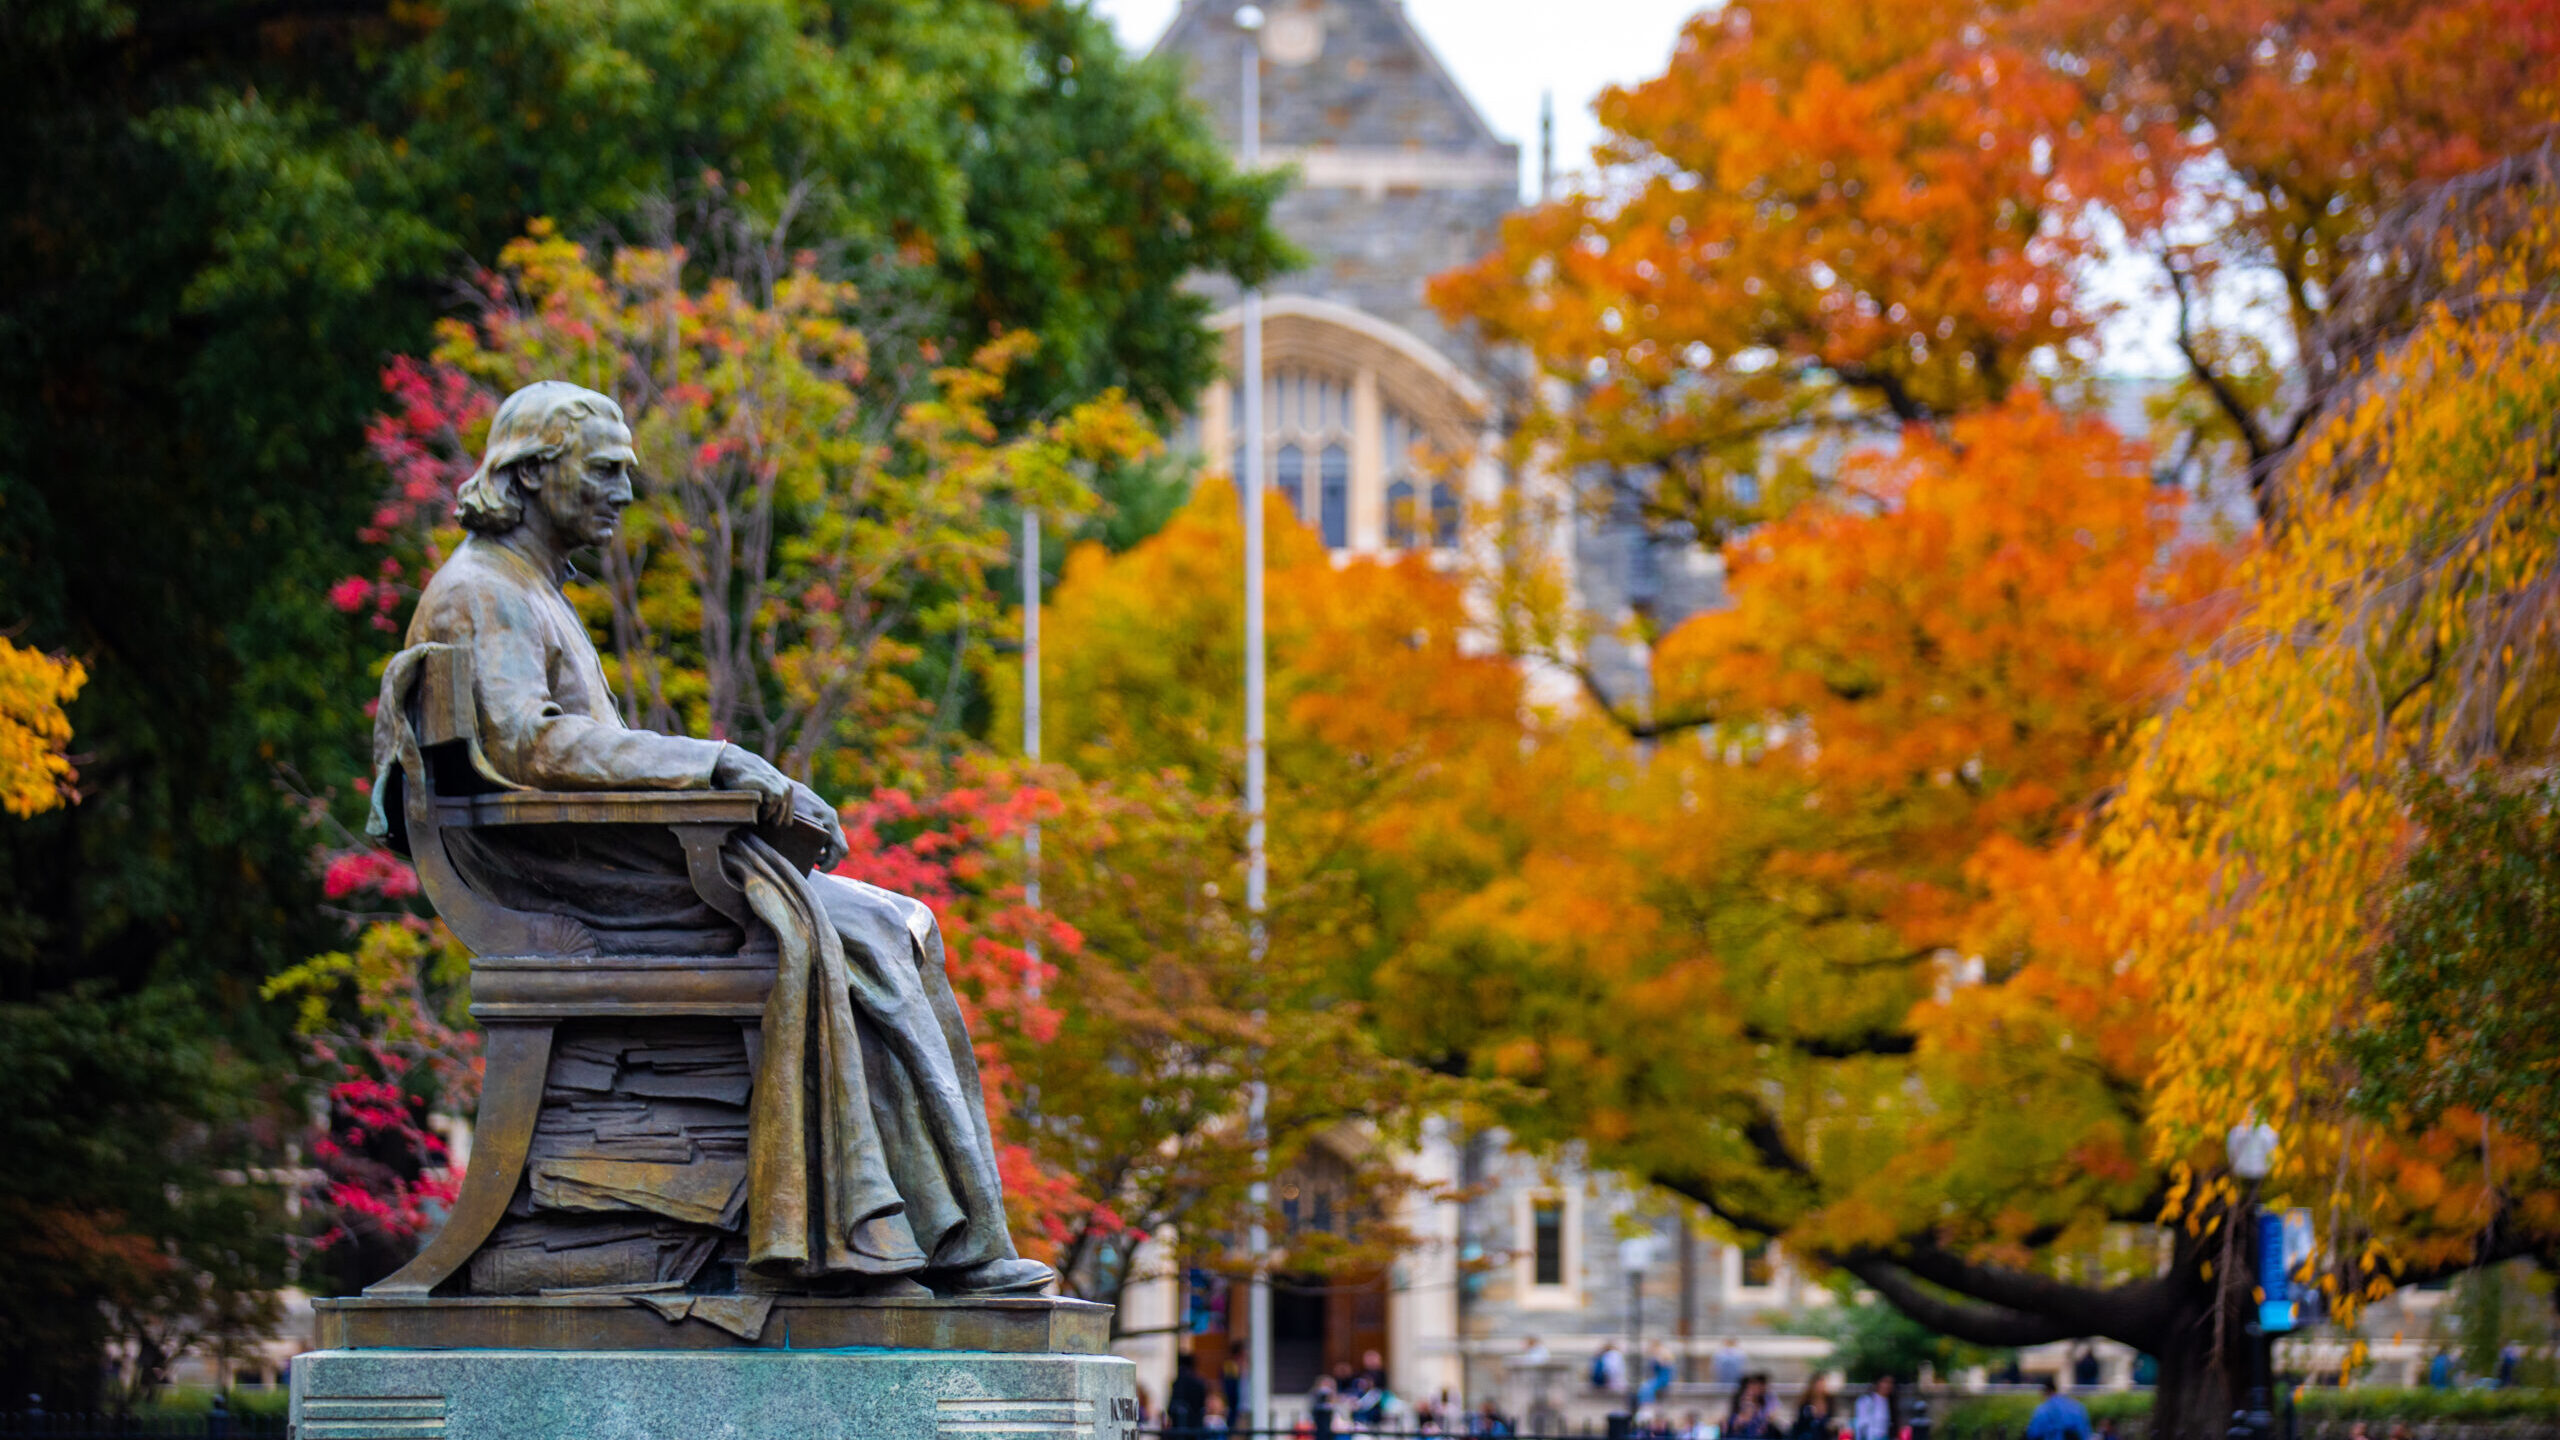 John Carroll statue on campus during the fall with leaves changing colors